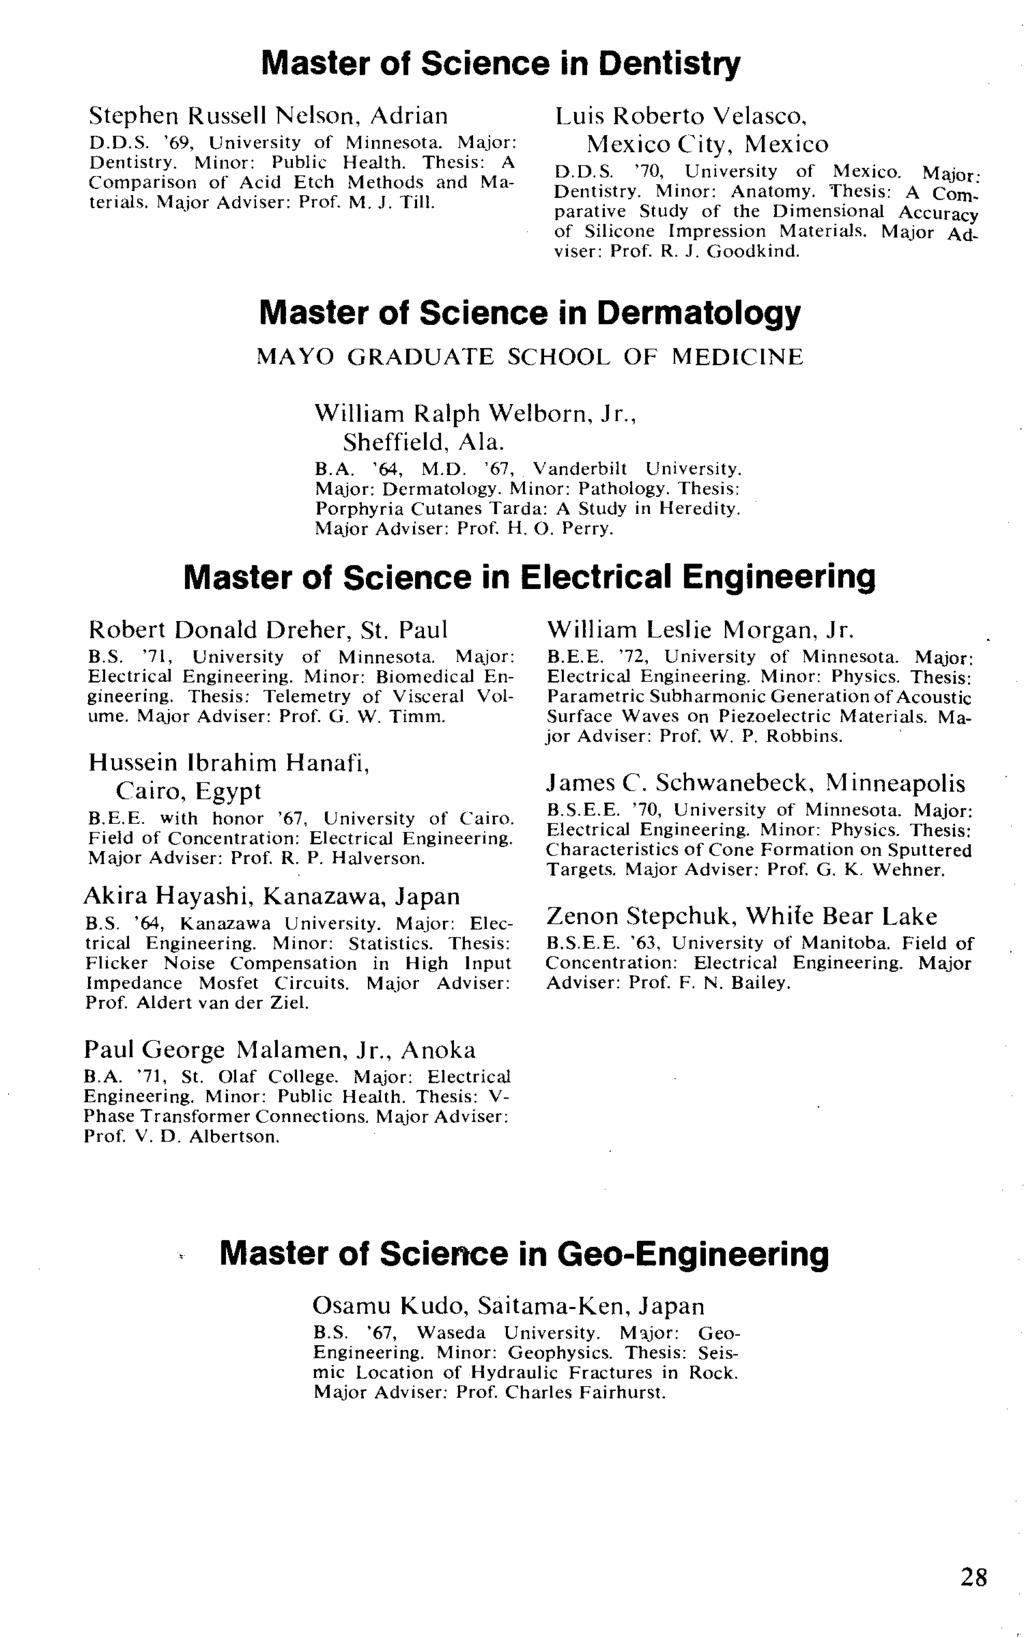 Master of Science in Dentistry Stephen Russell Nelson, Adrian D.D.S. '69, University of Minnesota. Major: Dentistry. Minor: Public Health. Thesis: A Comparison of Acid Etch Methods and Materials.